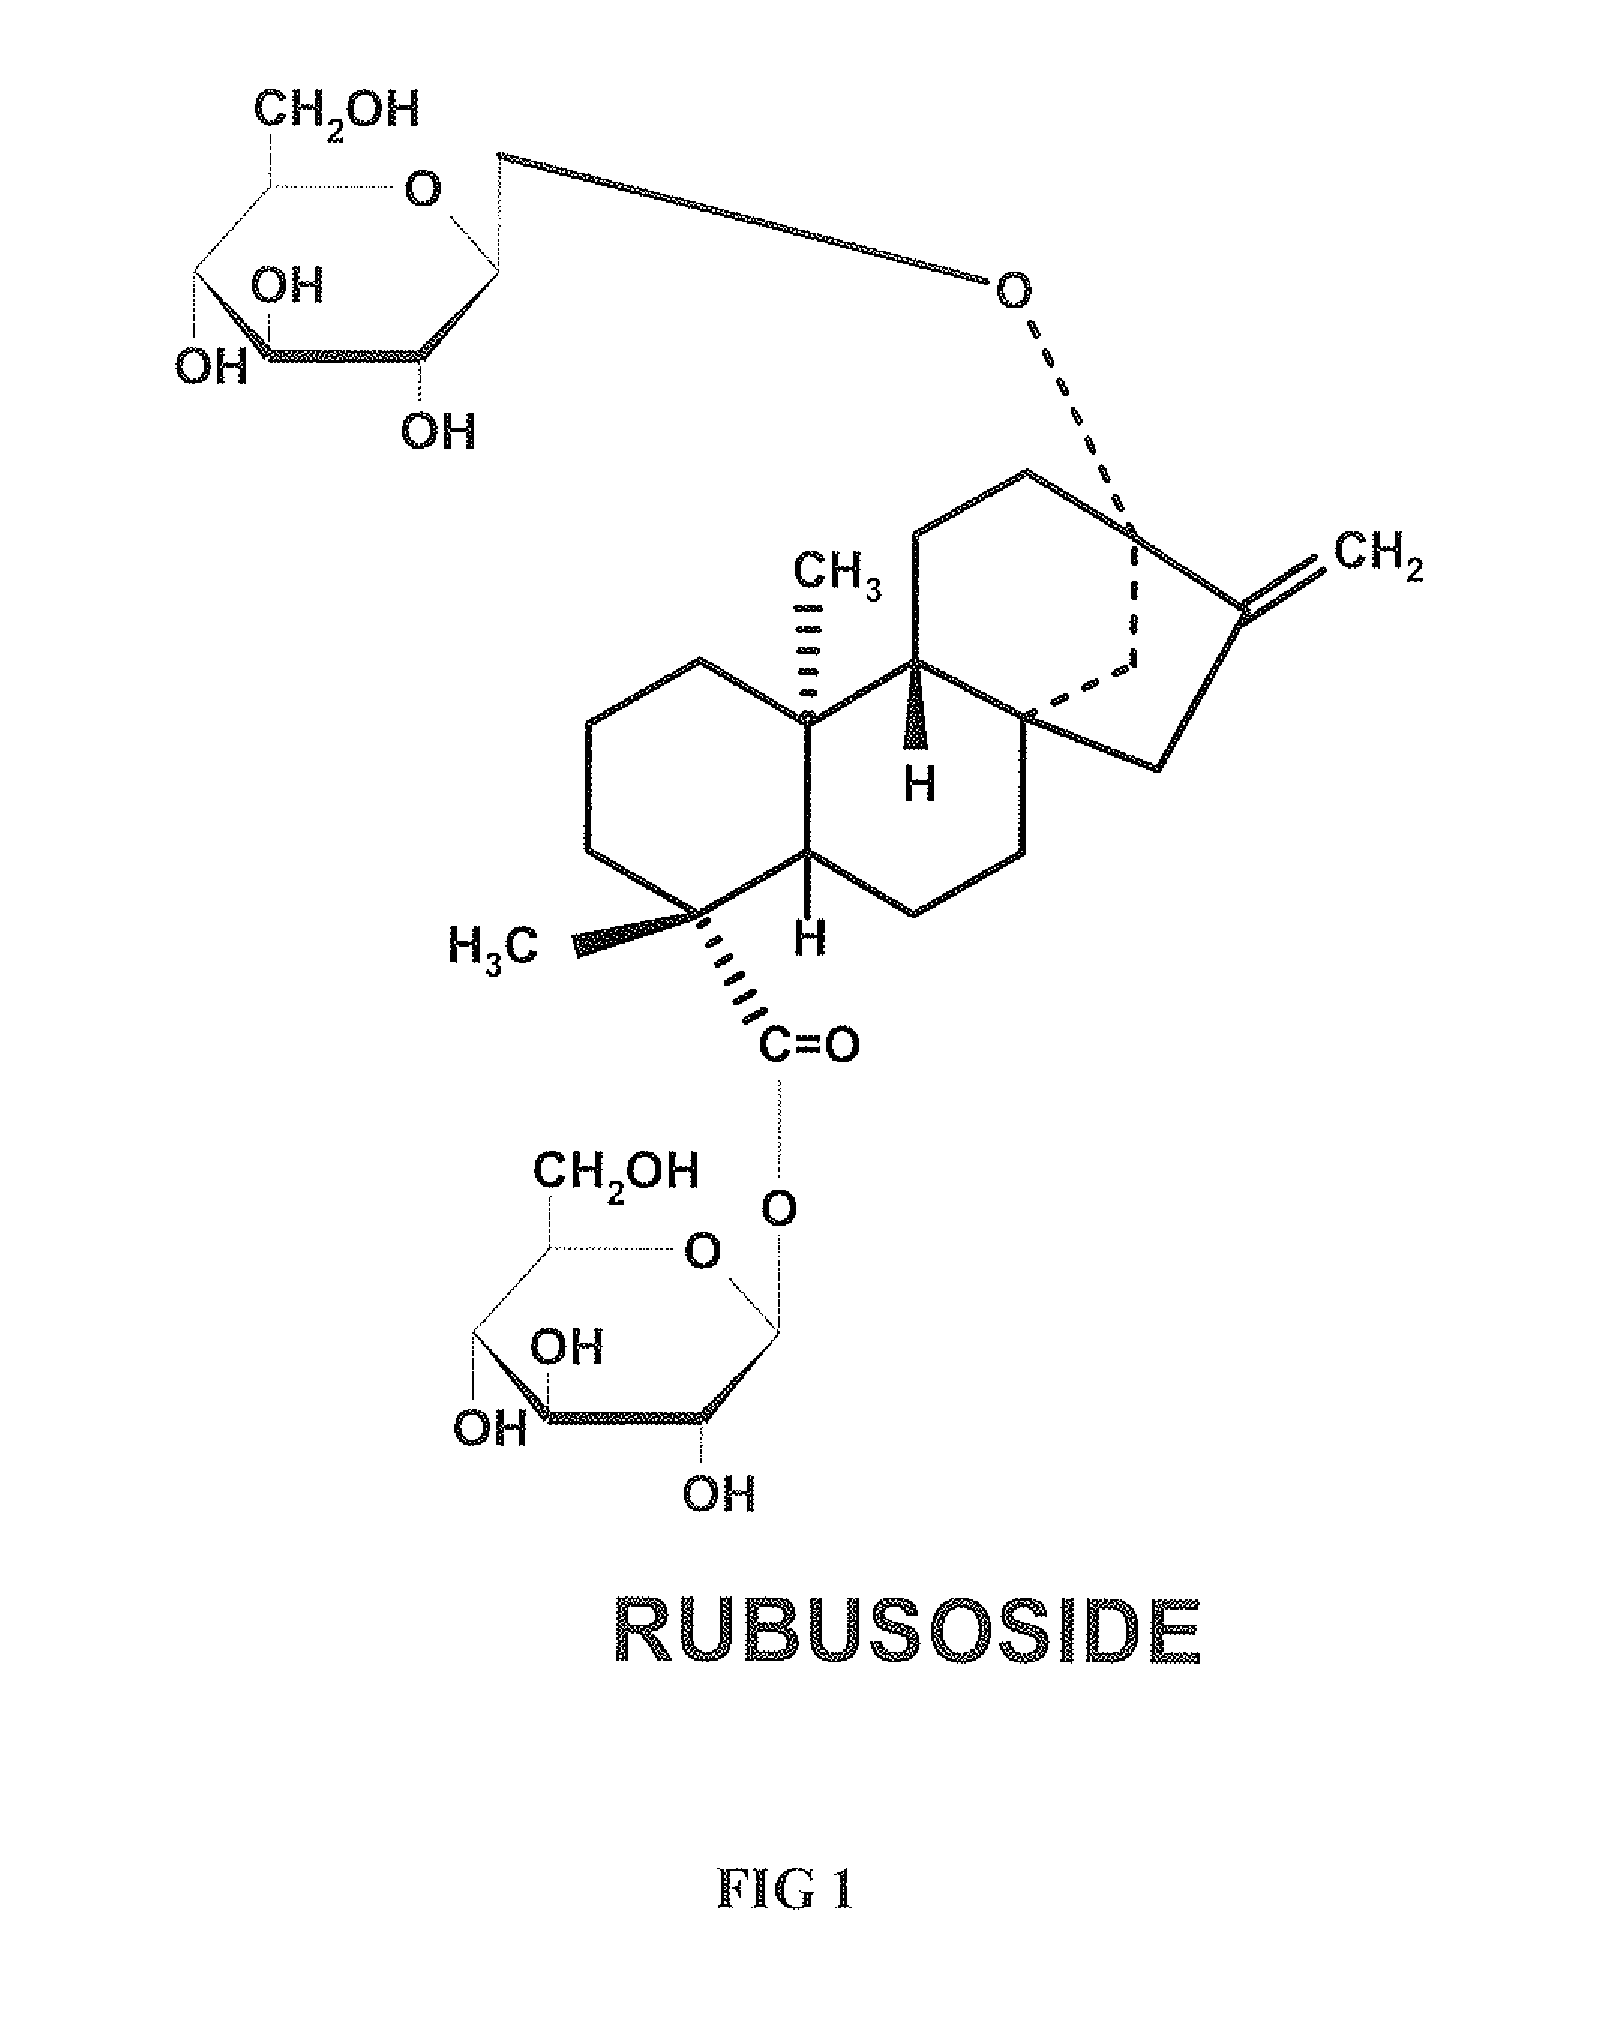 High-Purity Rubusoside And Process For Purification Of The Same